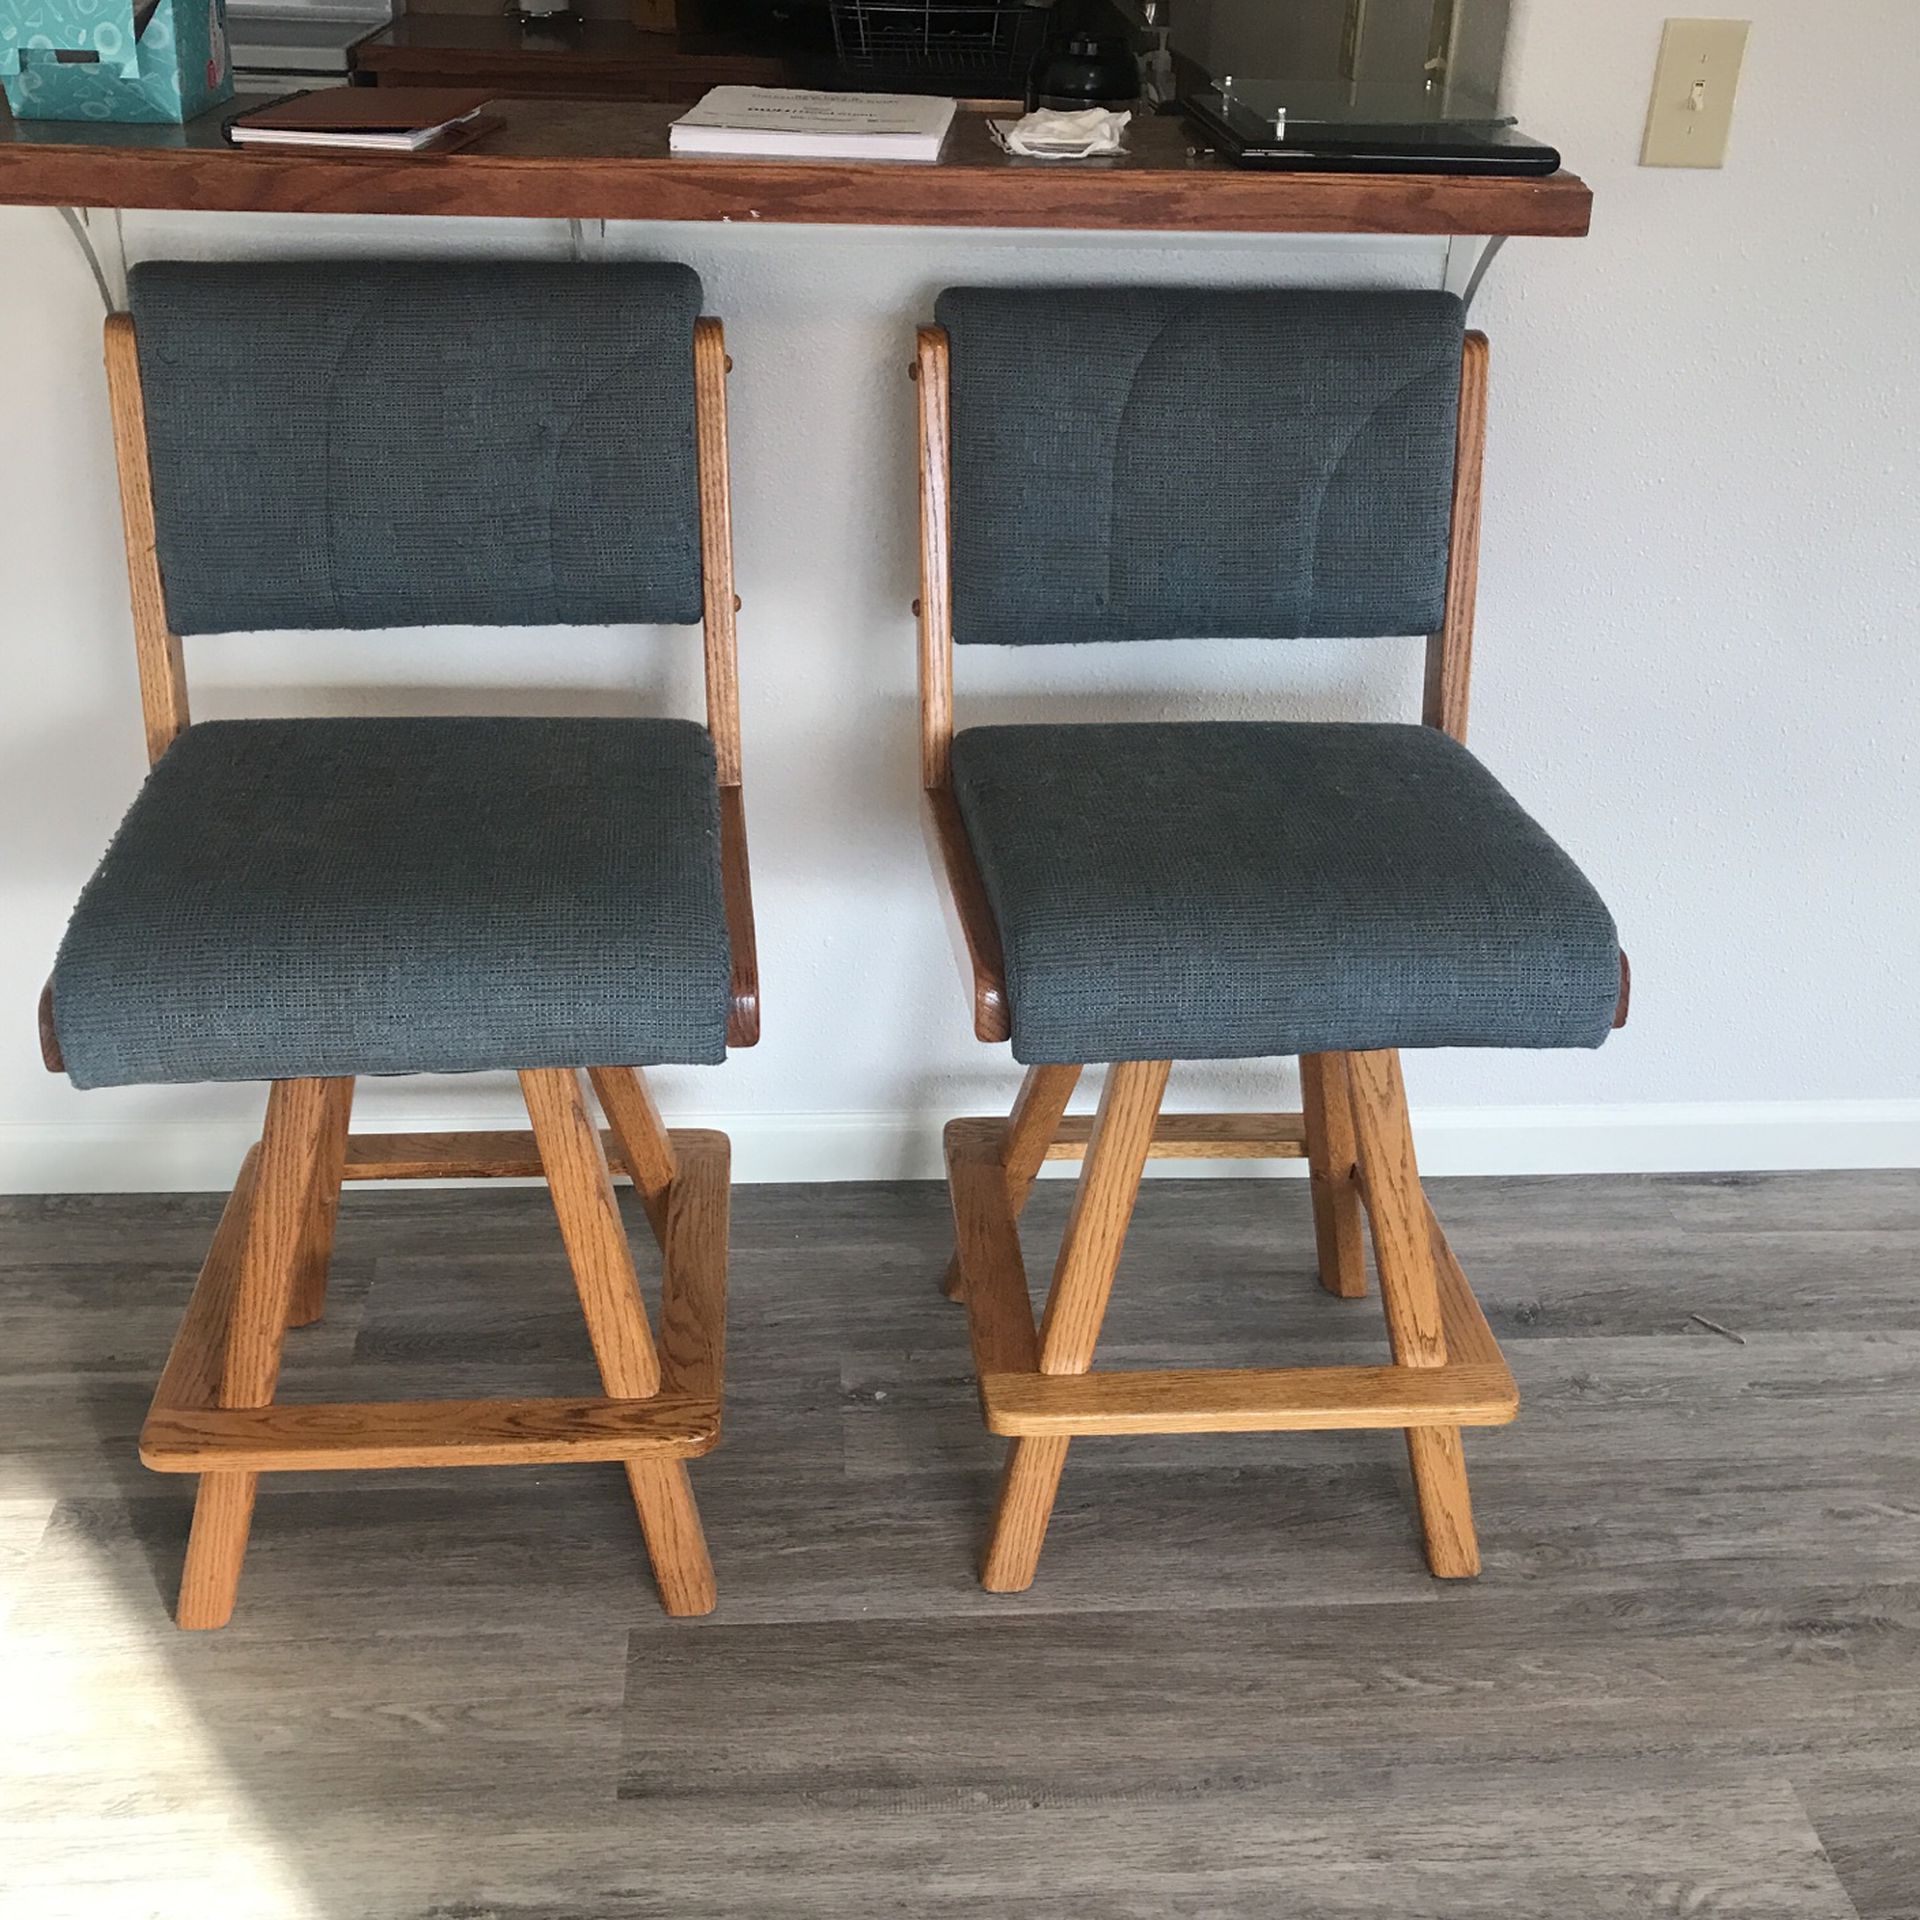 2 Tall Chairs